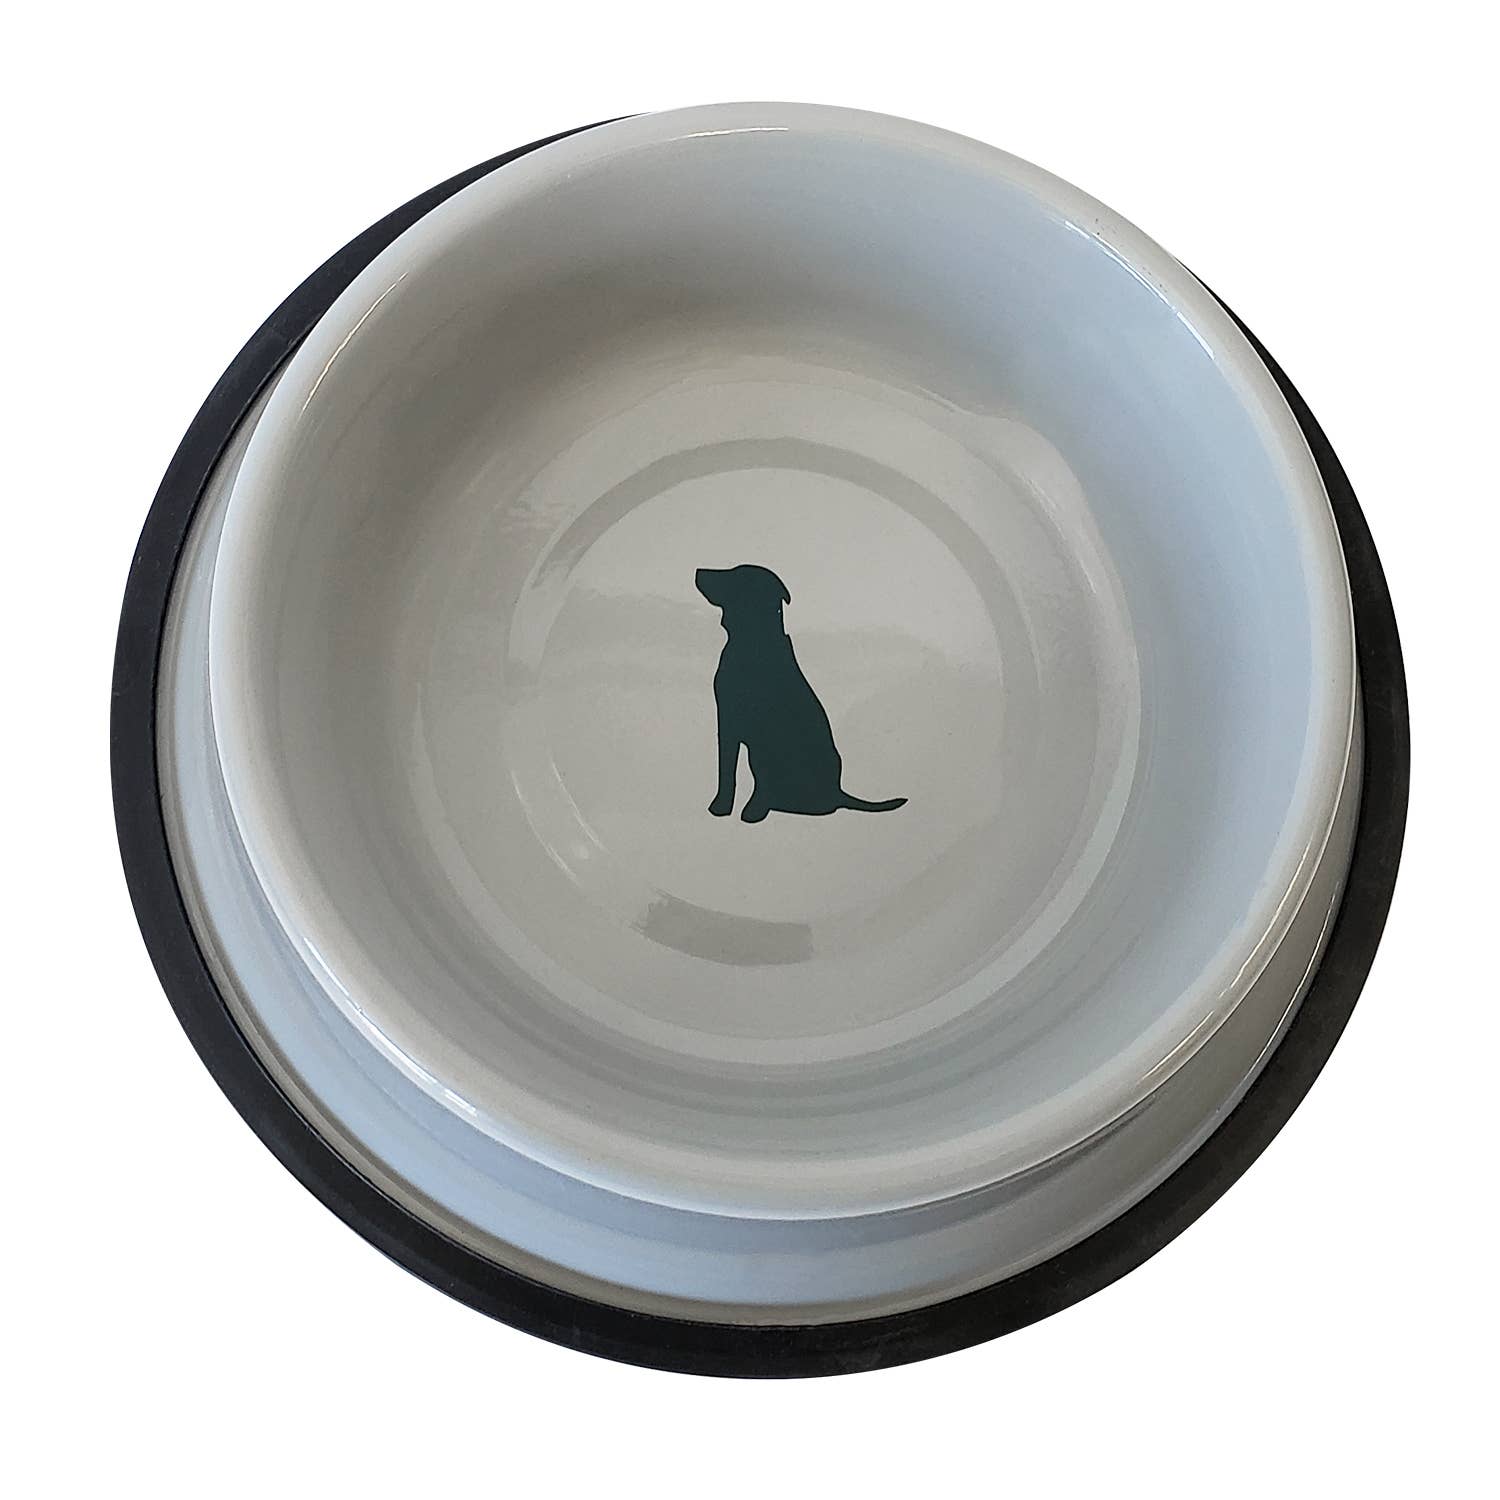 Jojo Modern Pets - Non Skid Cool Gray Bowl with Teal Dog Design